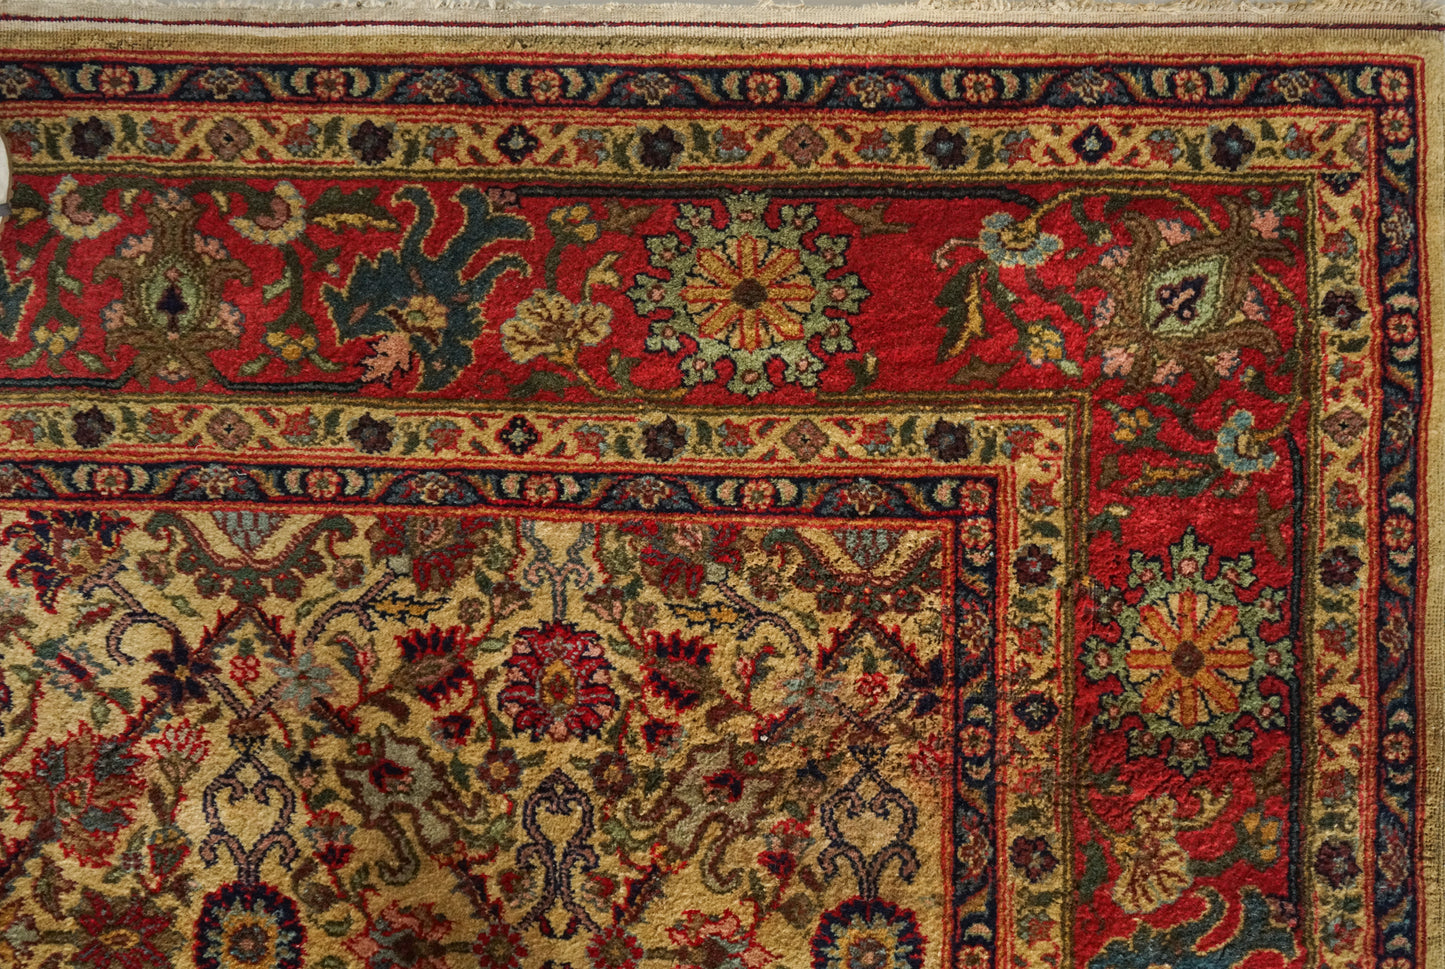 Large hand woven rug - Arts and crafts - liberty style influence